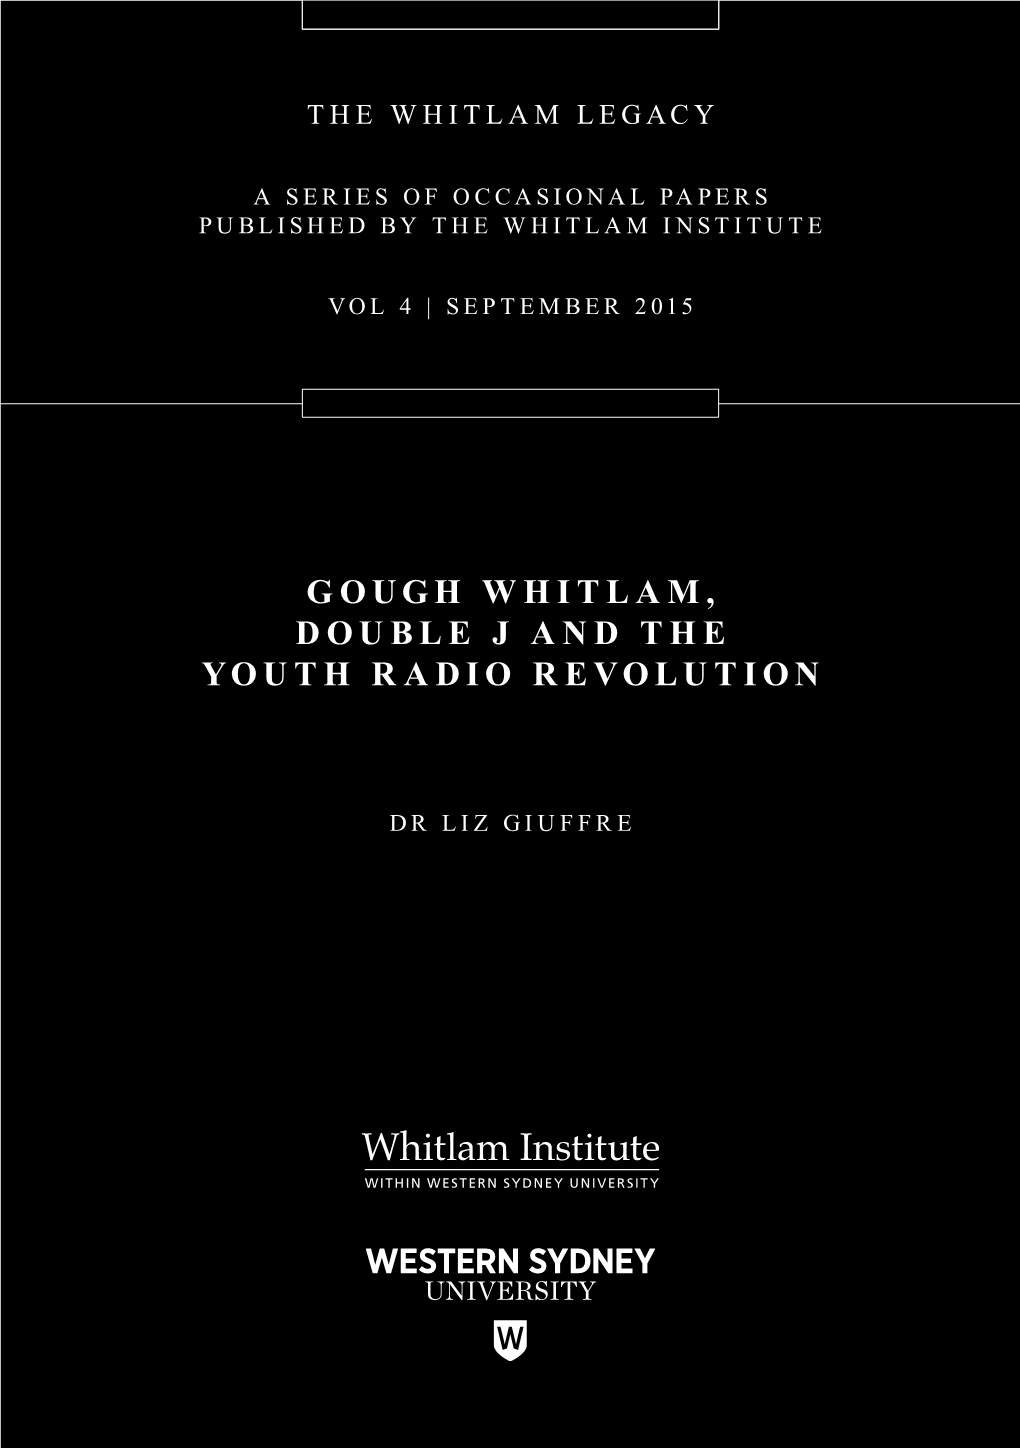 Gough Whitlam, Double J and the Youth Radio Revolution